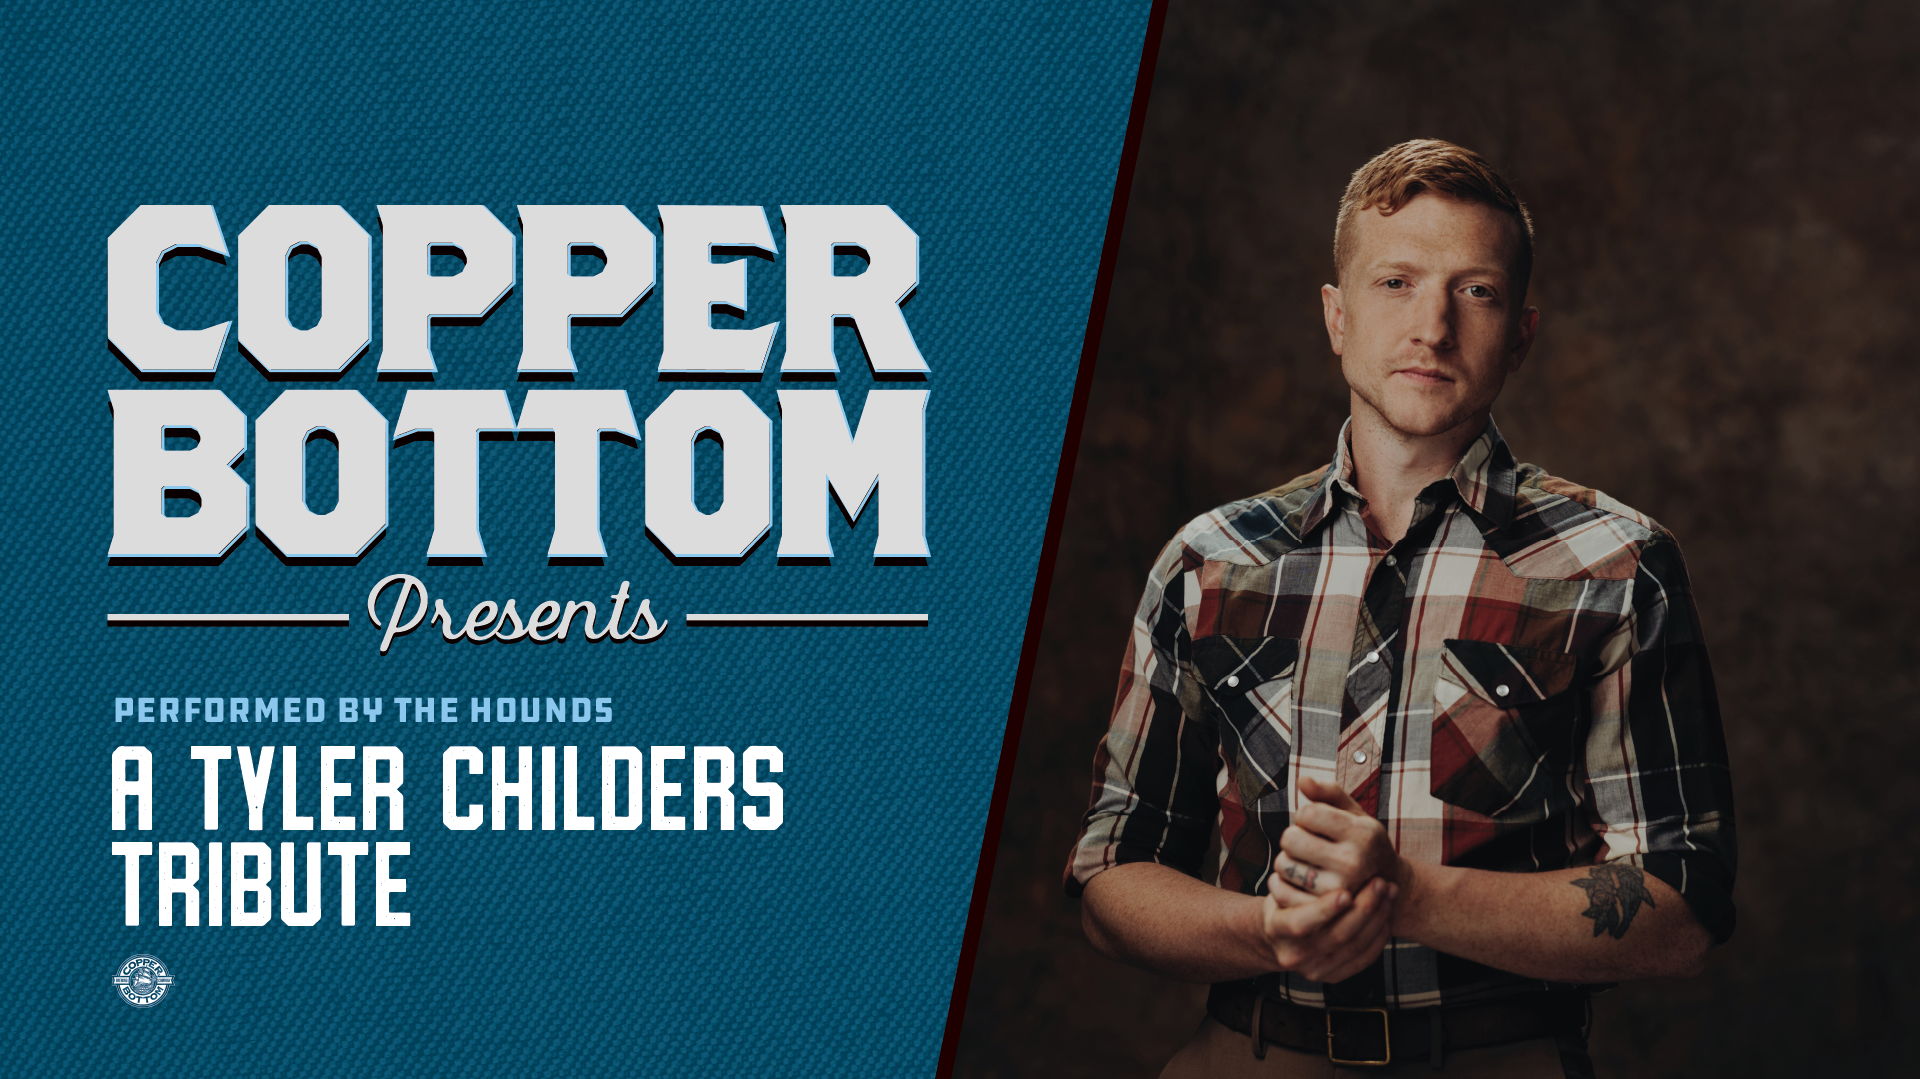 Copper Bottom Presents: The Hounds - A Tyler Childers Tribute